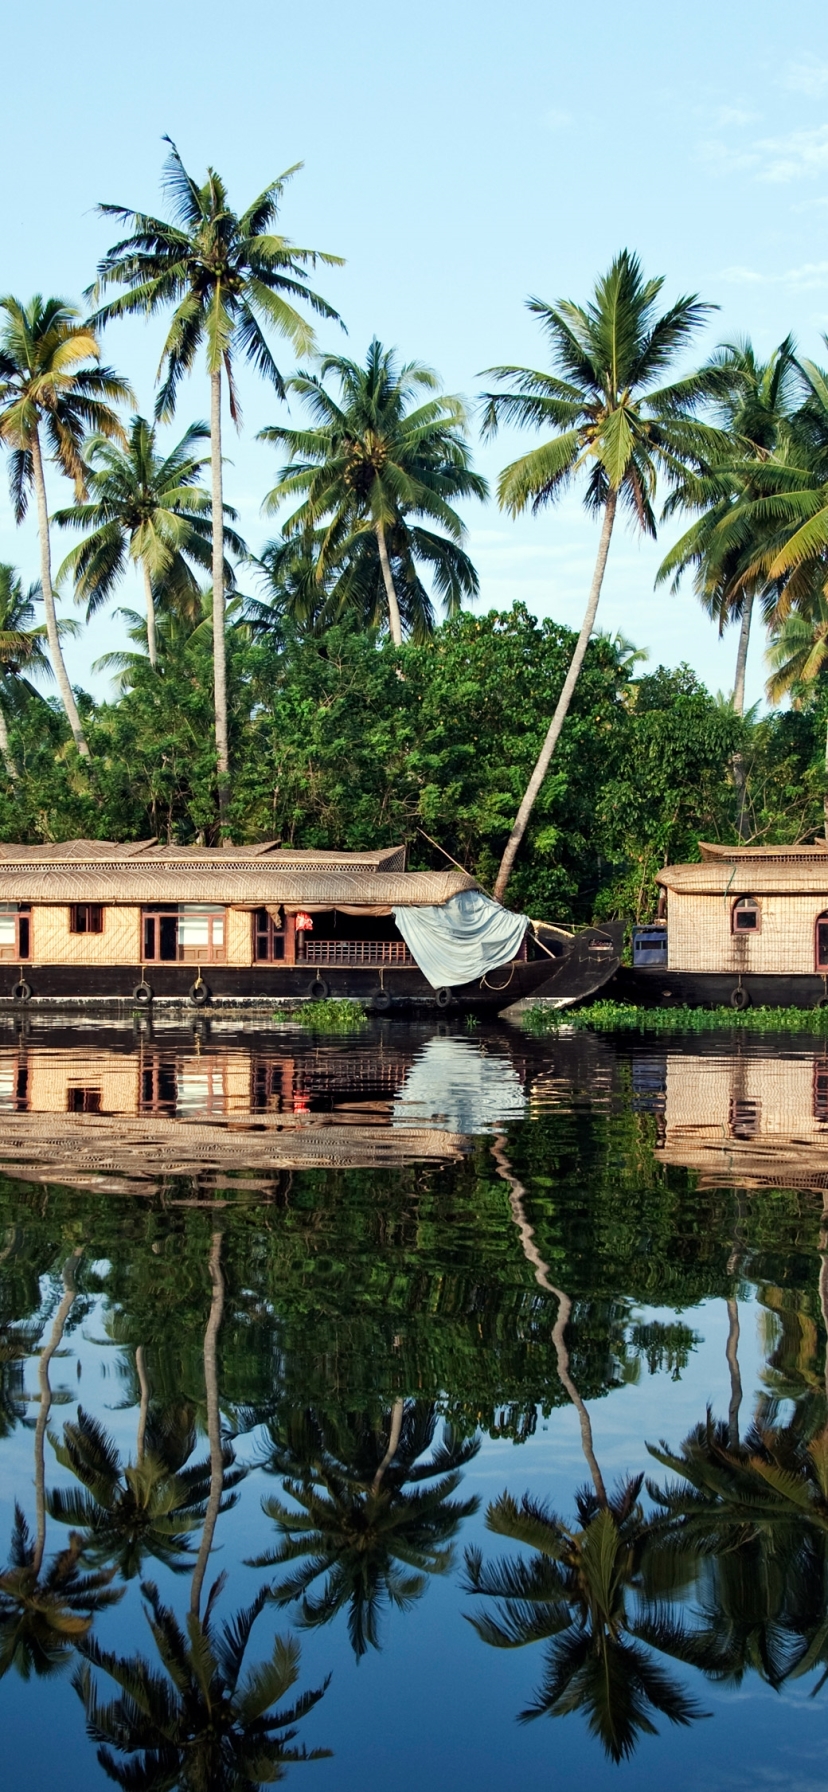 Houseboats in the backwaters in Alappuzha, Kerala, India by Martin Harvey